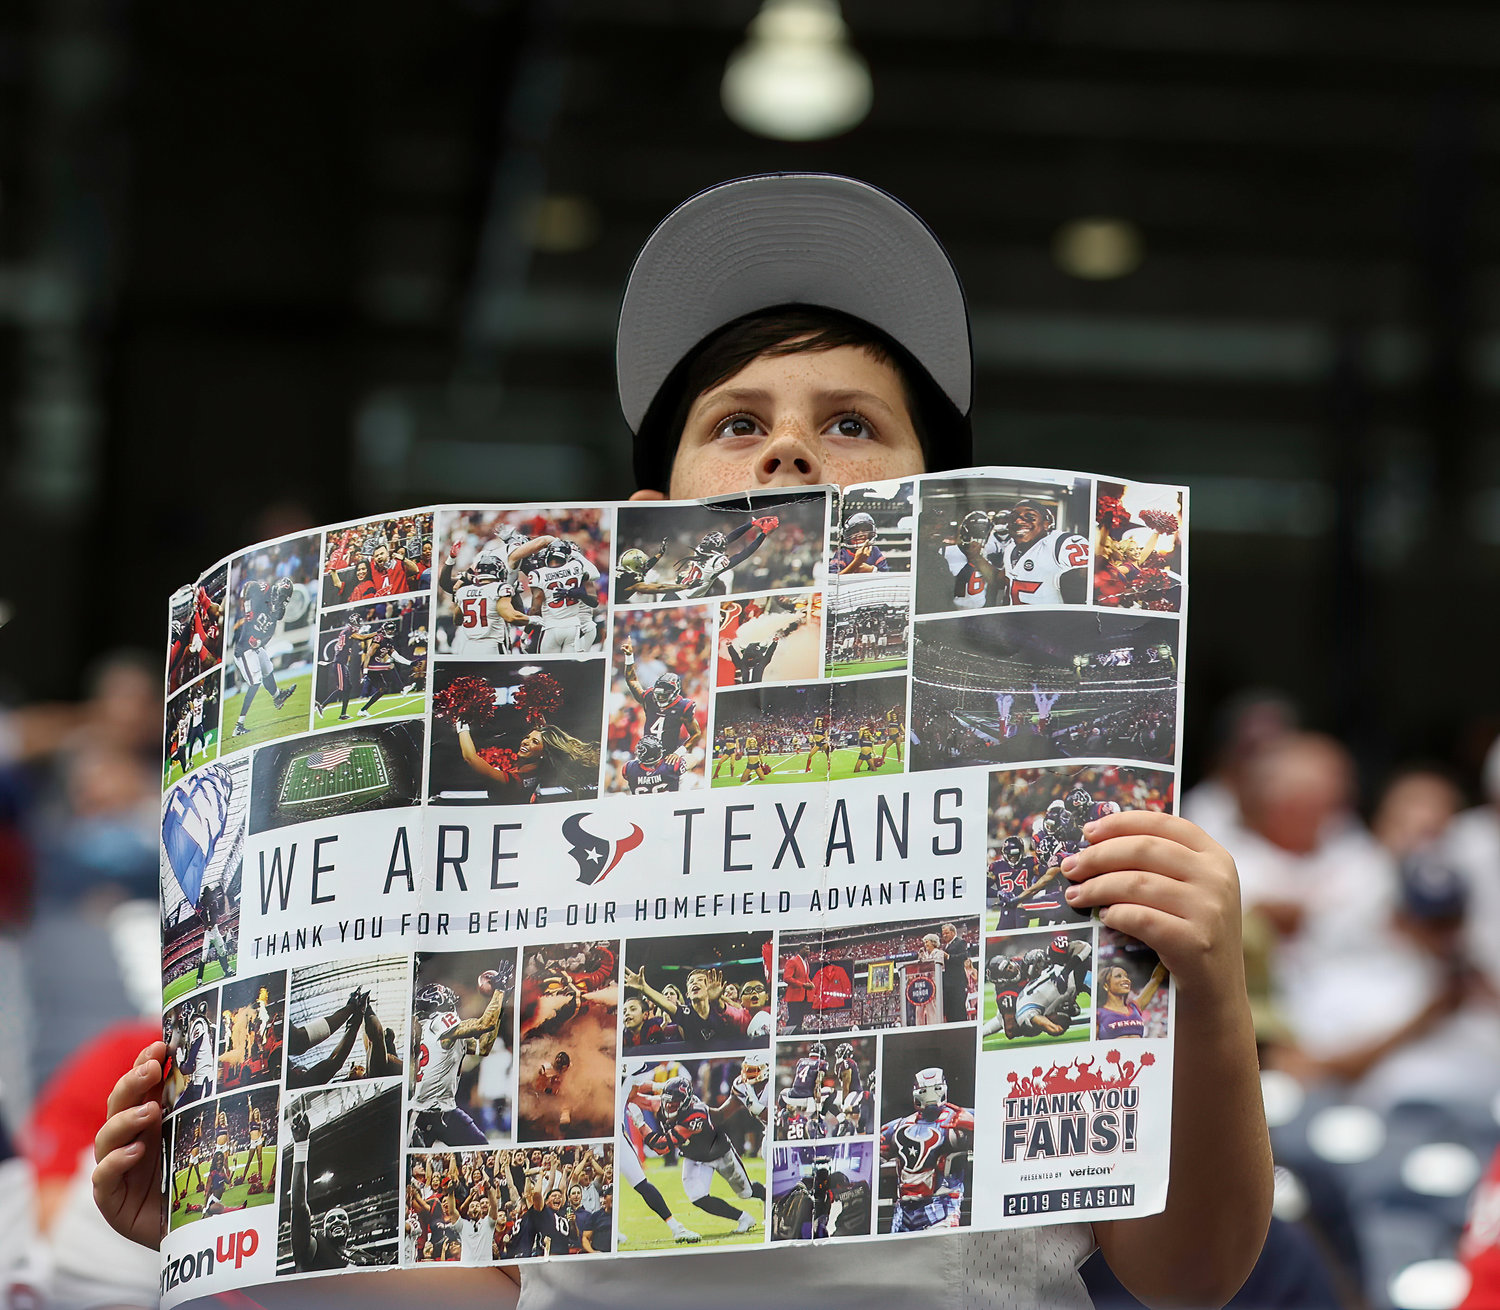 A Houston Texans fan during an NFL game between the Texans and the Colts on September 11, 2022 in Houston. The game ended in a 20-20 tie after a scoreless overtime period.